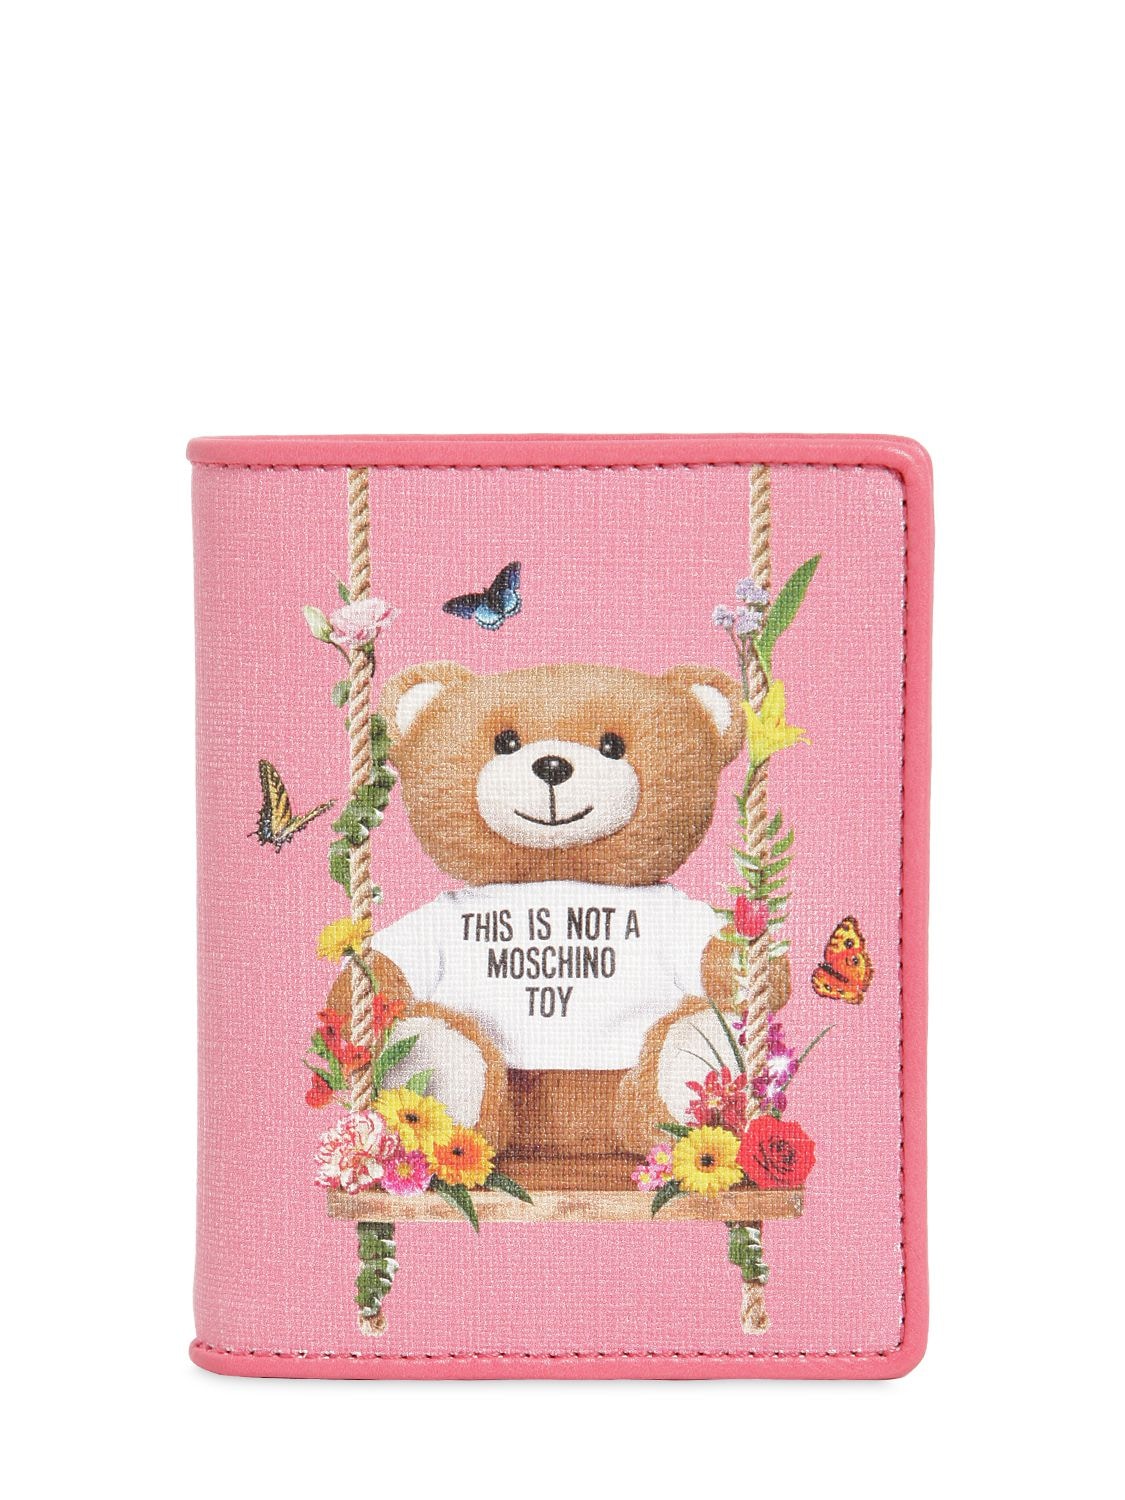 Moschino Teddy Printed Snap Wallet In Pink